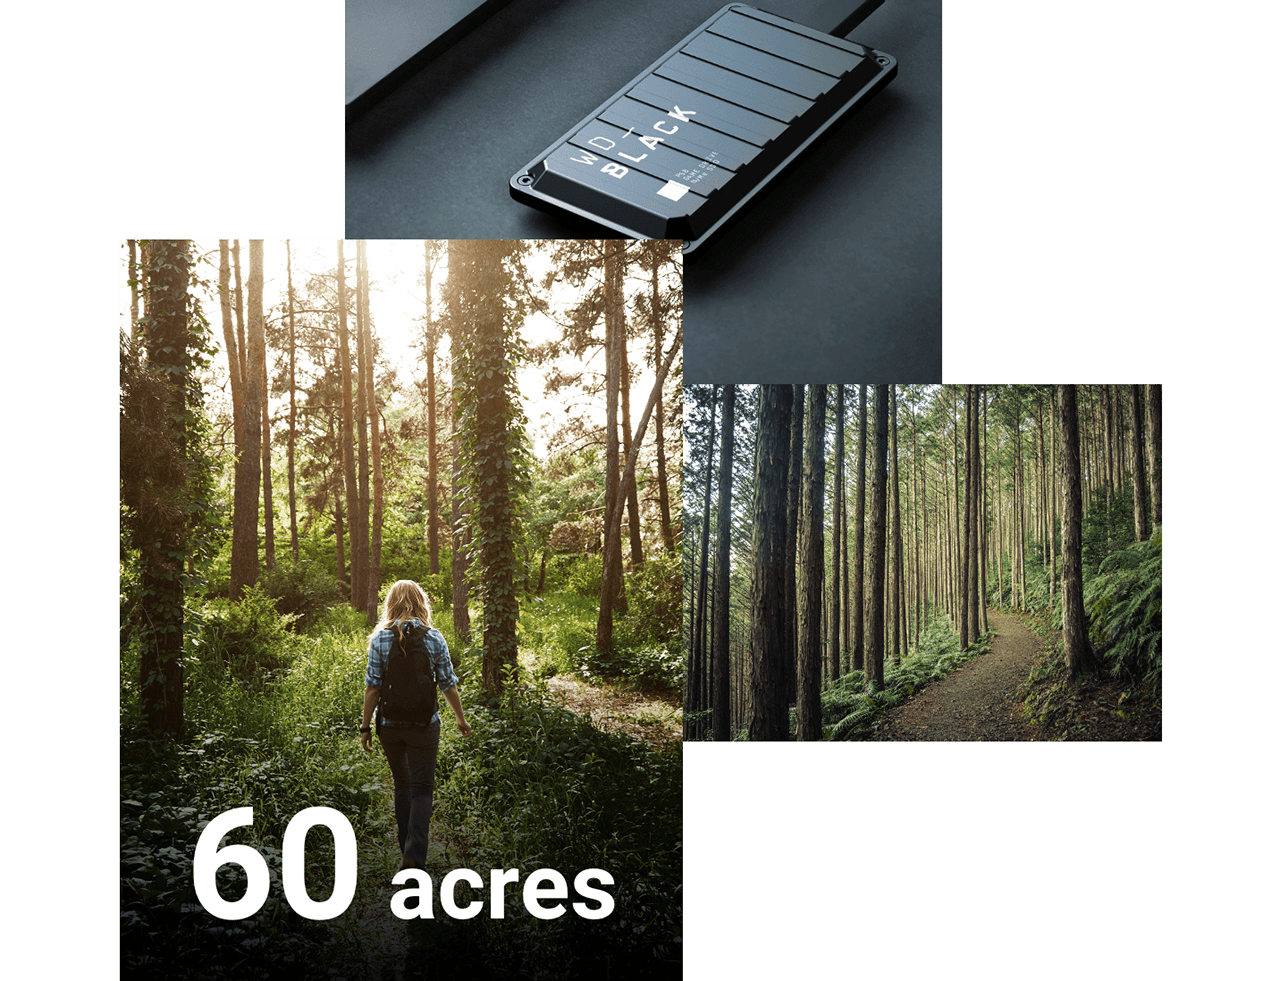 60 acres of trees saved